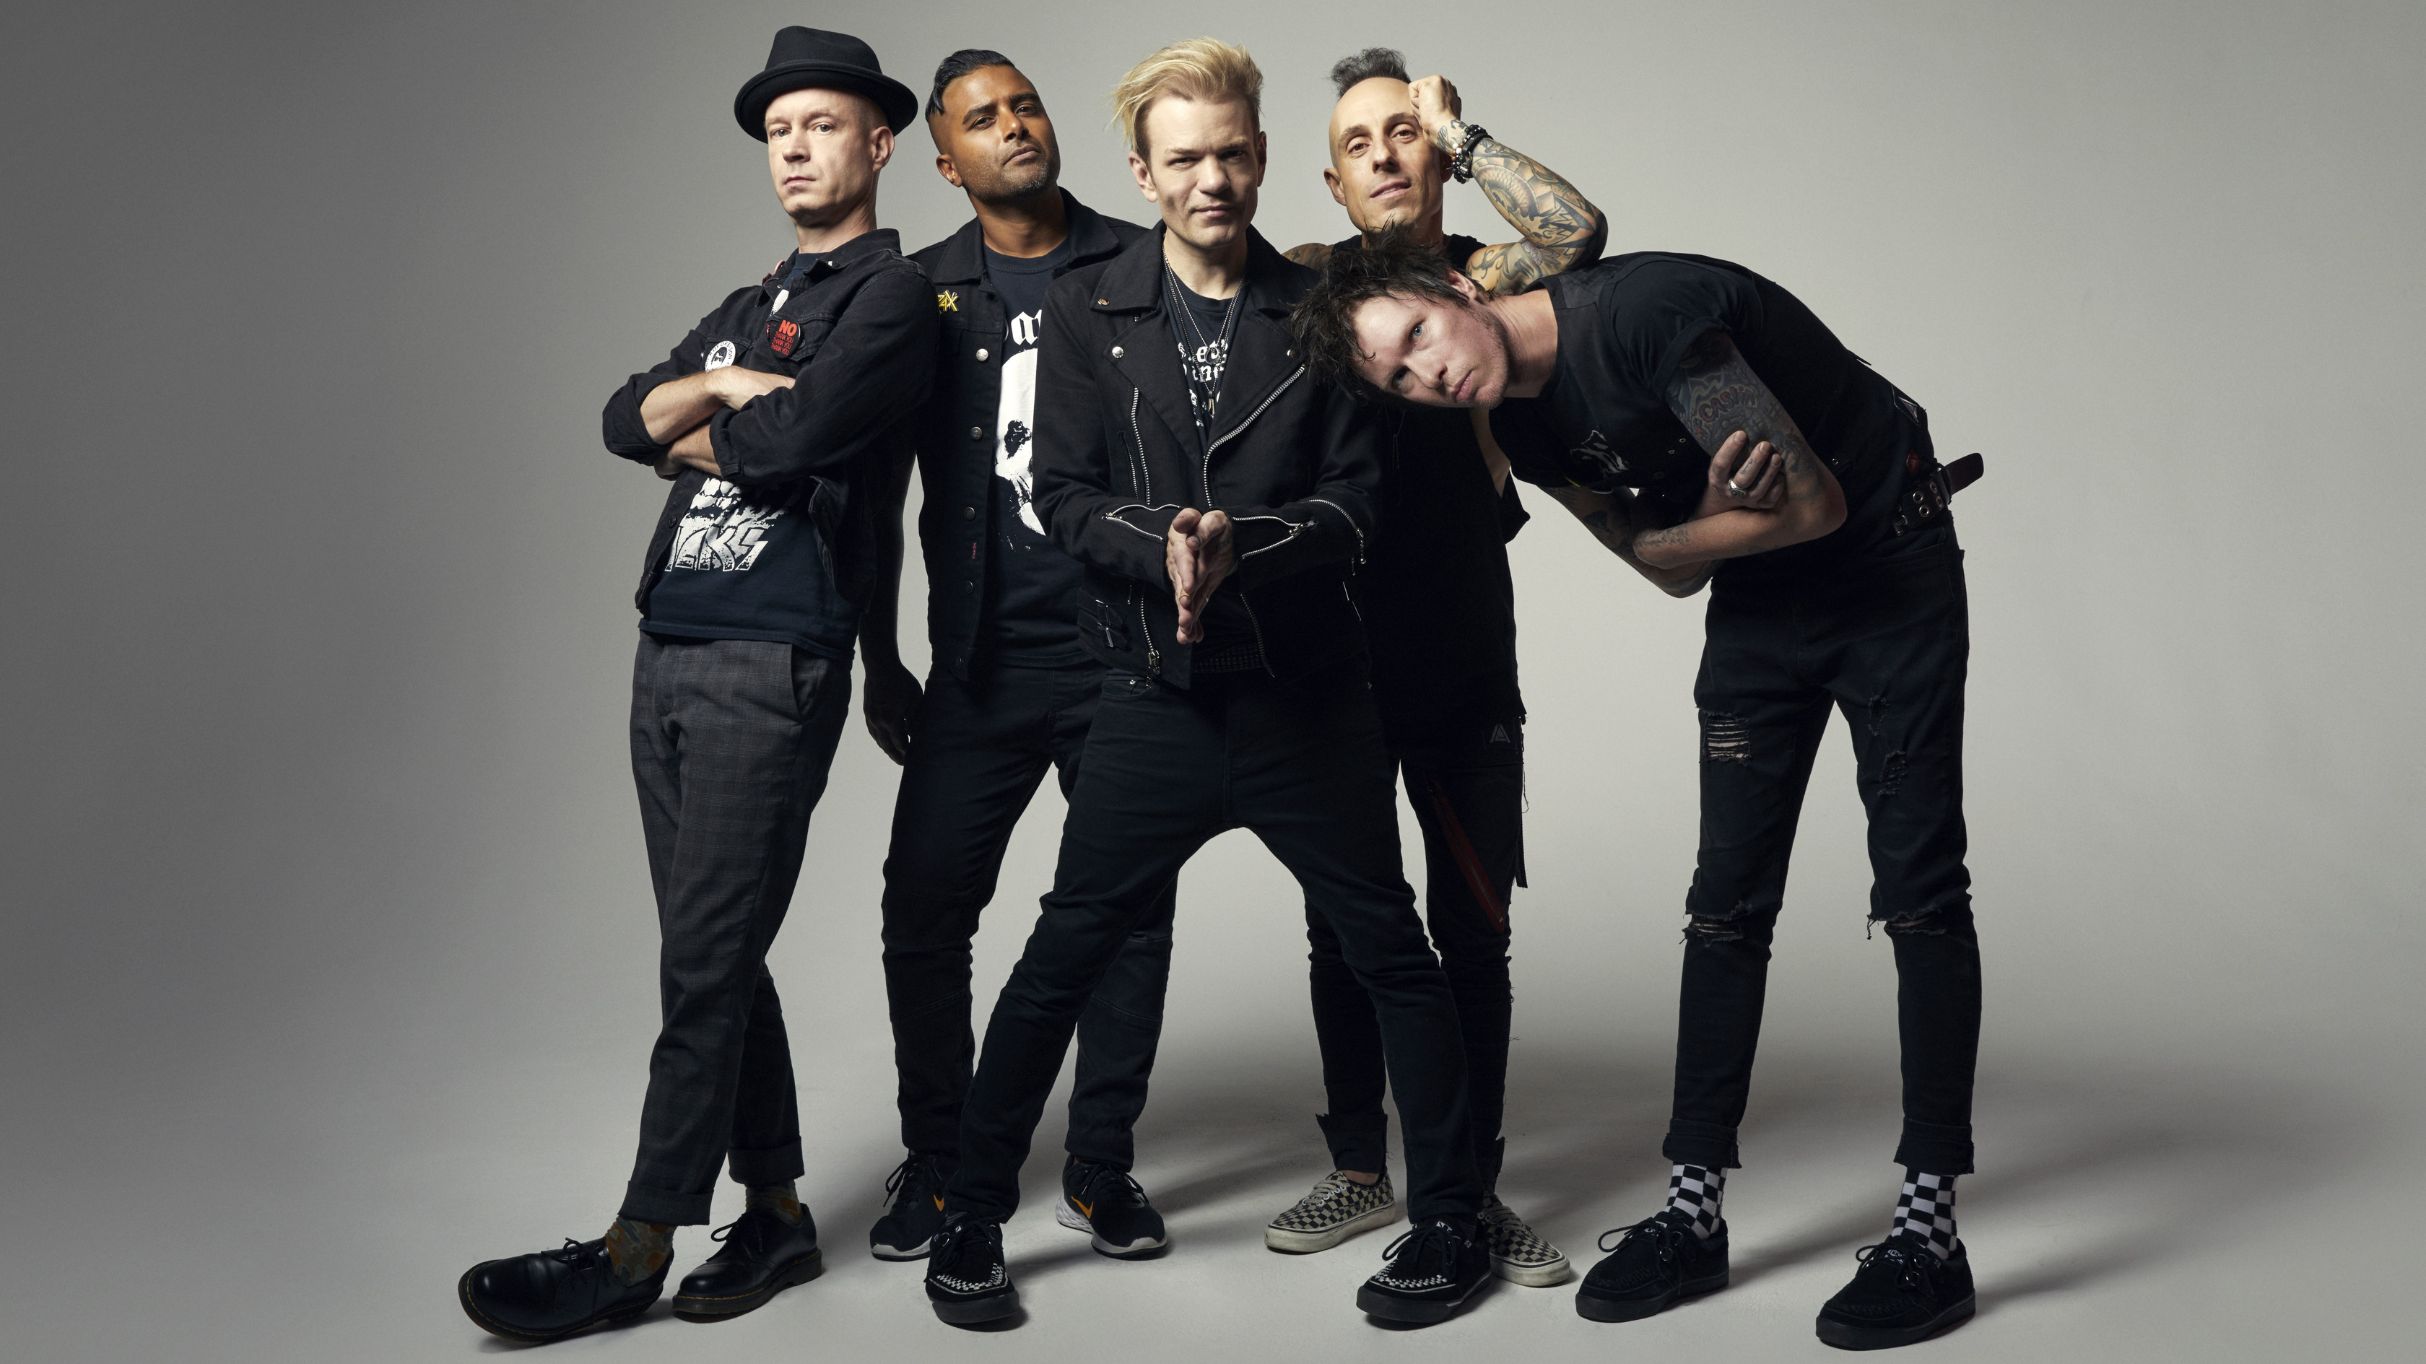 Live 105 Presents: Sum 41: Tour of the Setting Sum